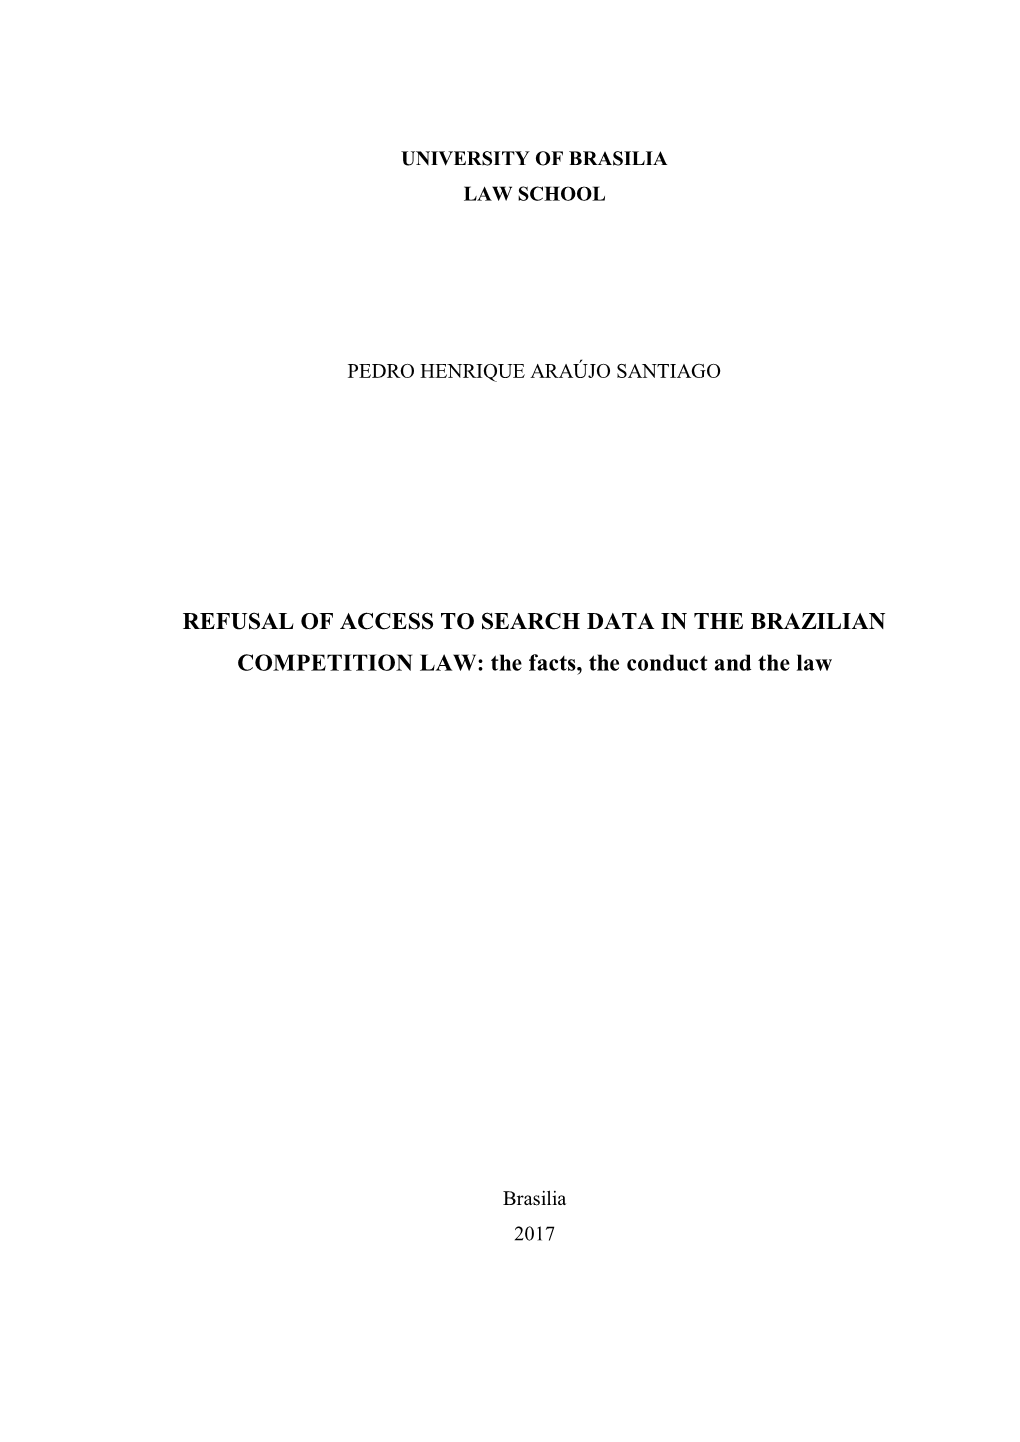 REFUSAL of ACCESS to SEARCH DATA in the BRAZILIAN COMPETITION LAW: the Facts, the Conduct and the Law